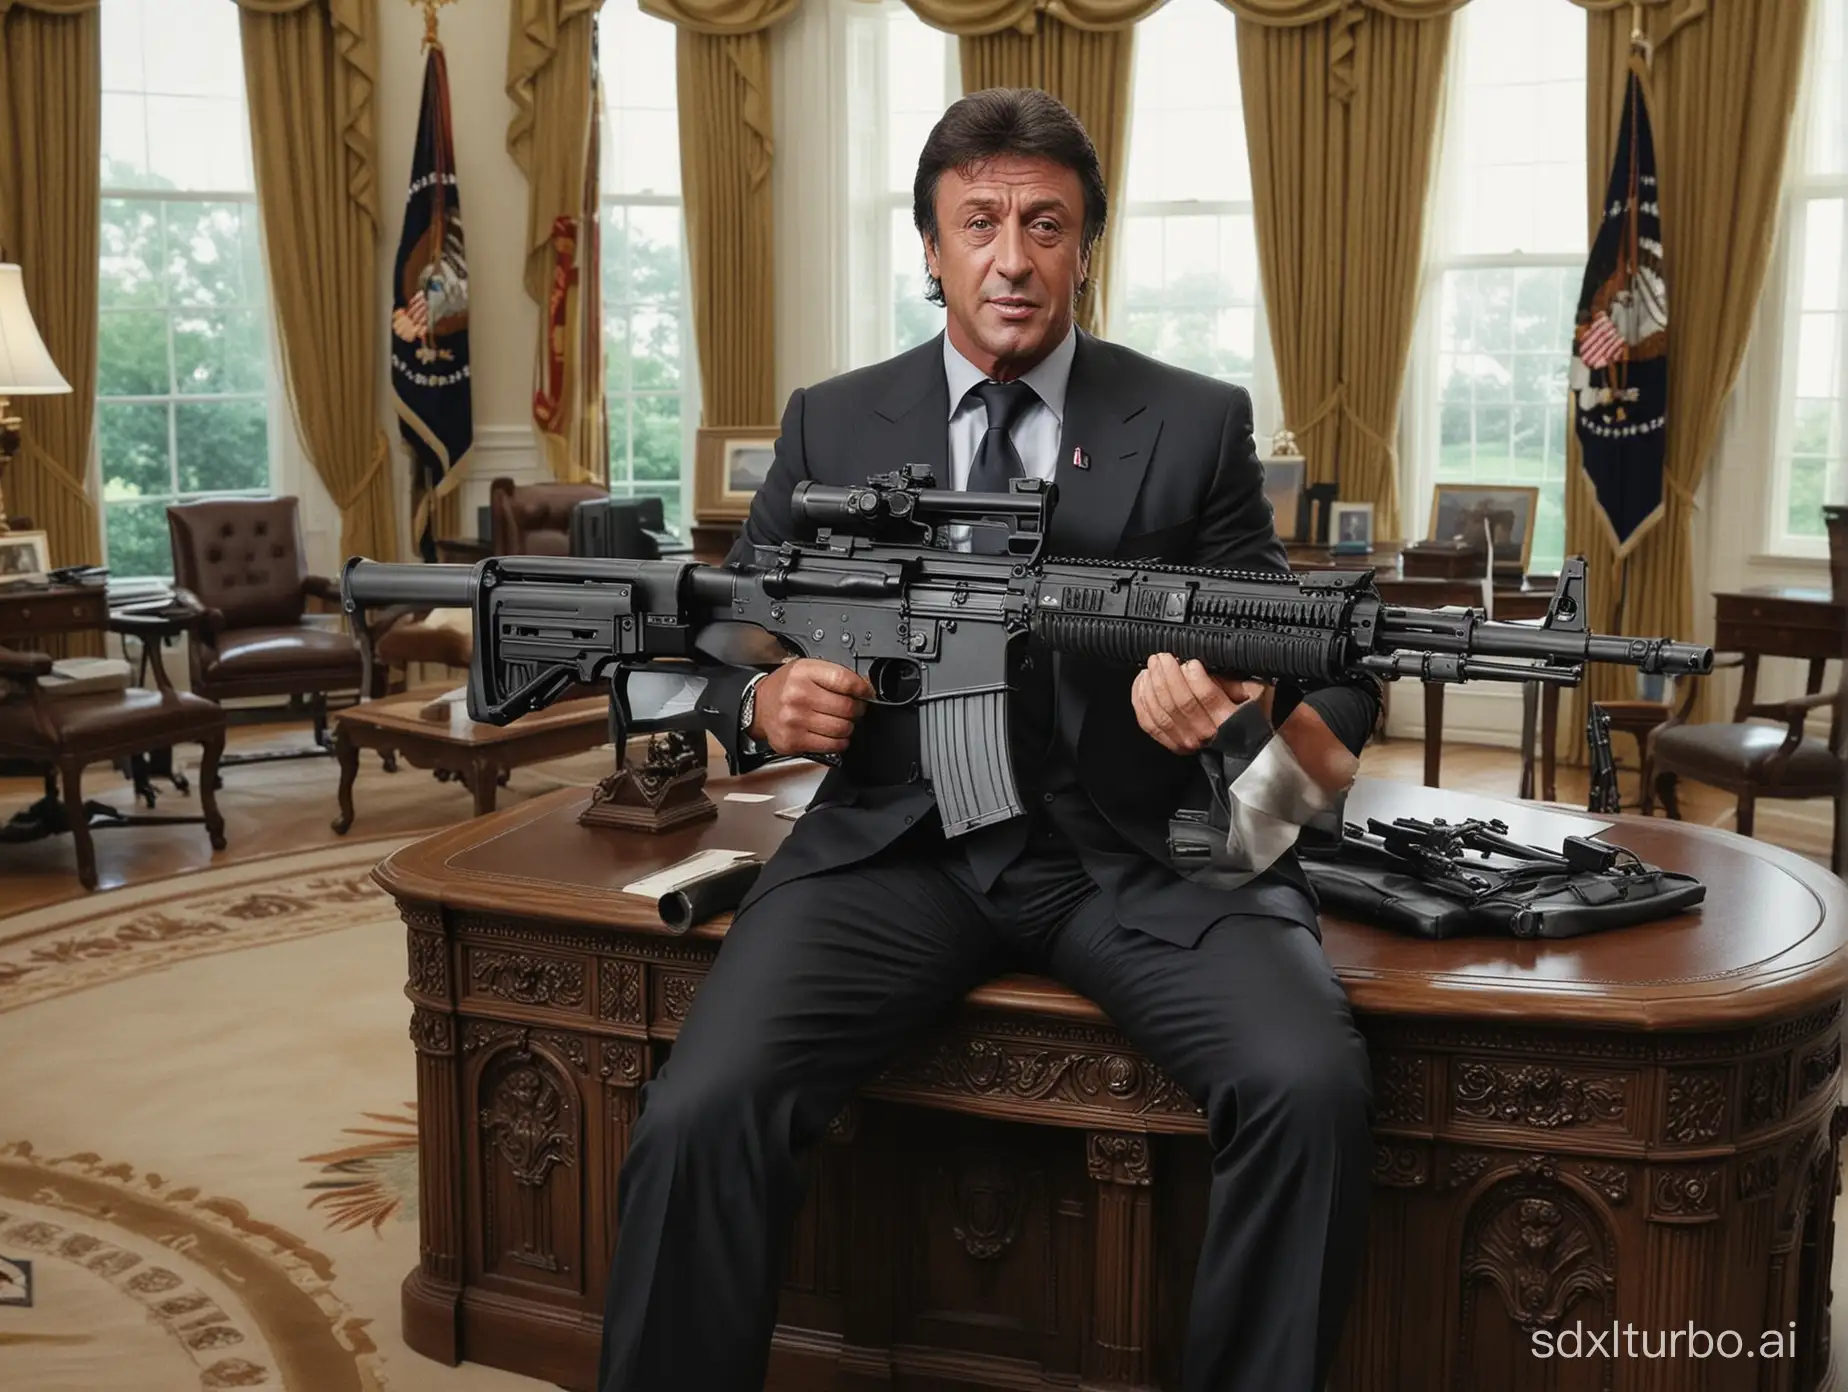 Arnold Sylvestre Stallone's Rambo as president sitting in the oval office of the Whitehouse he is holding a 50 calibre machine gun rendered as an extremely photo realistic imaging.